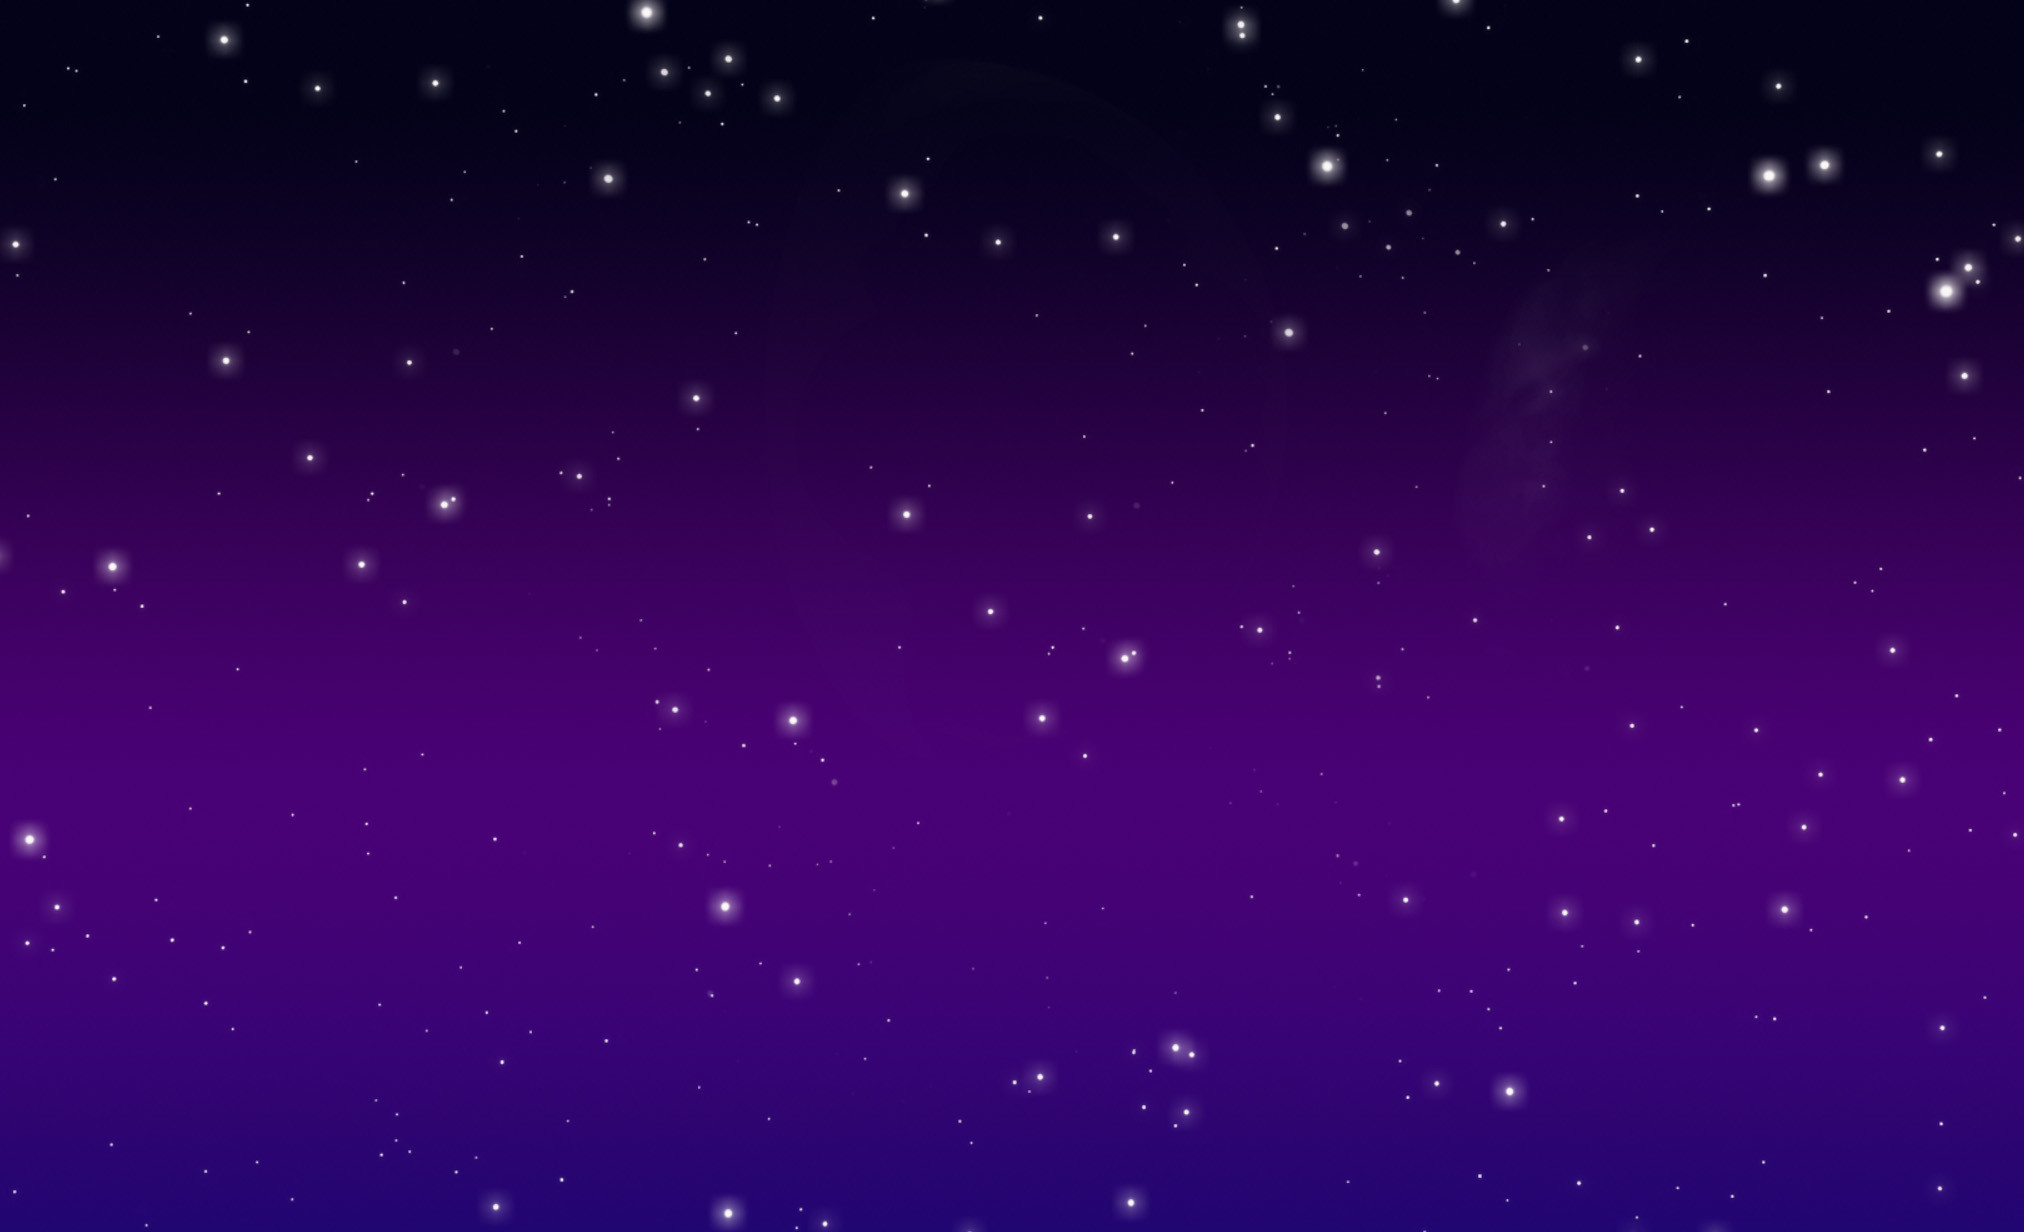 999 Purple Night Sky Pictures  Download Free Images on Unsplash